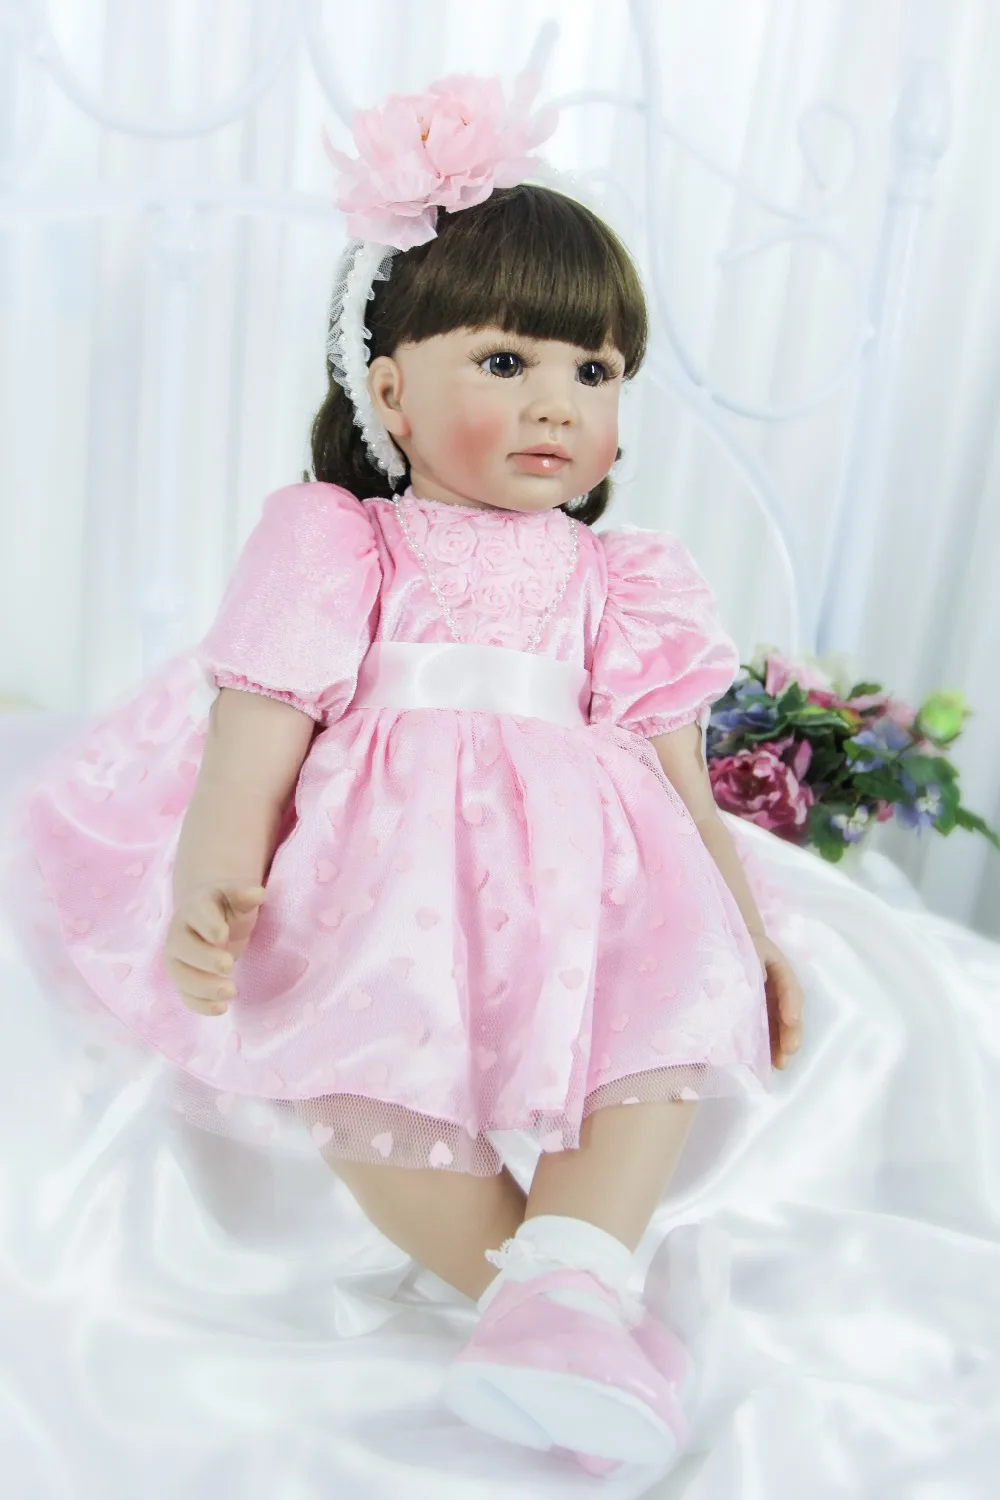 Pursue 24/60 cm Pink Dress Baby Alive Silicone Reborn Toddler Baby Princess Girl Doll Toys for Children Girls Bedtime Fun Gifts